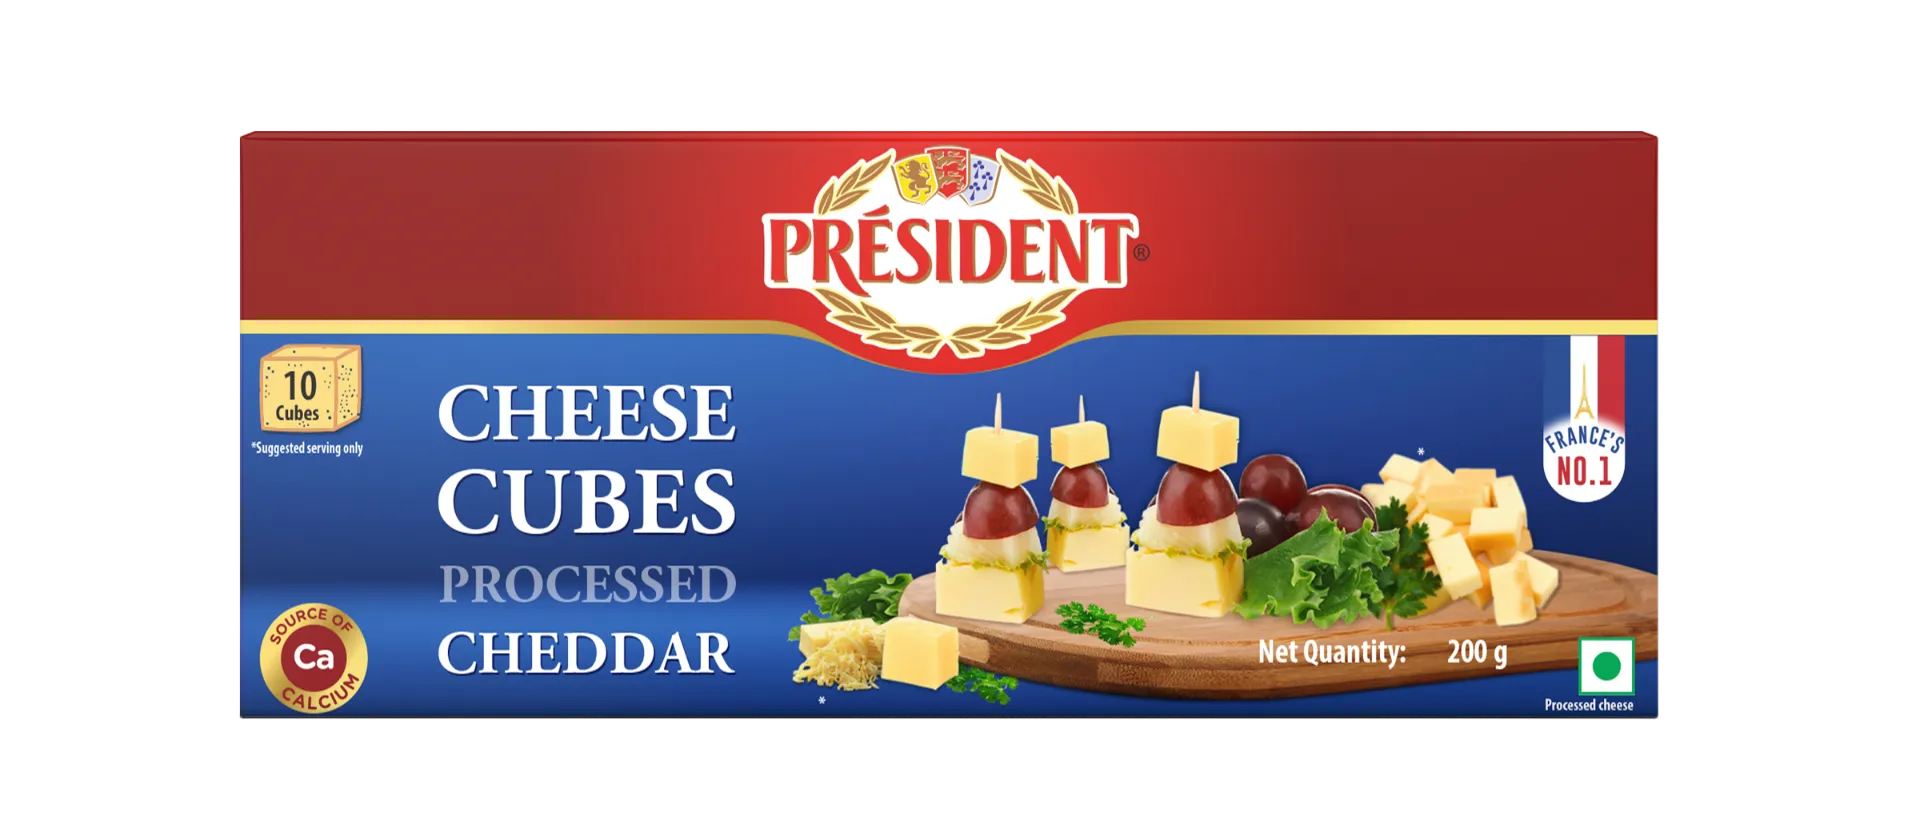 President India Cheese Cheddar Processed Cubes 200gm